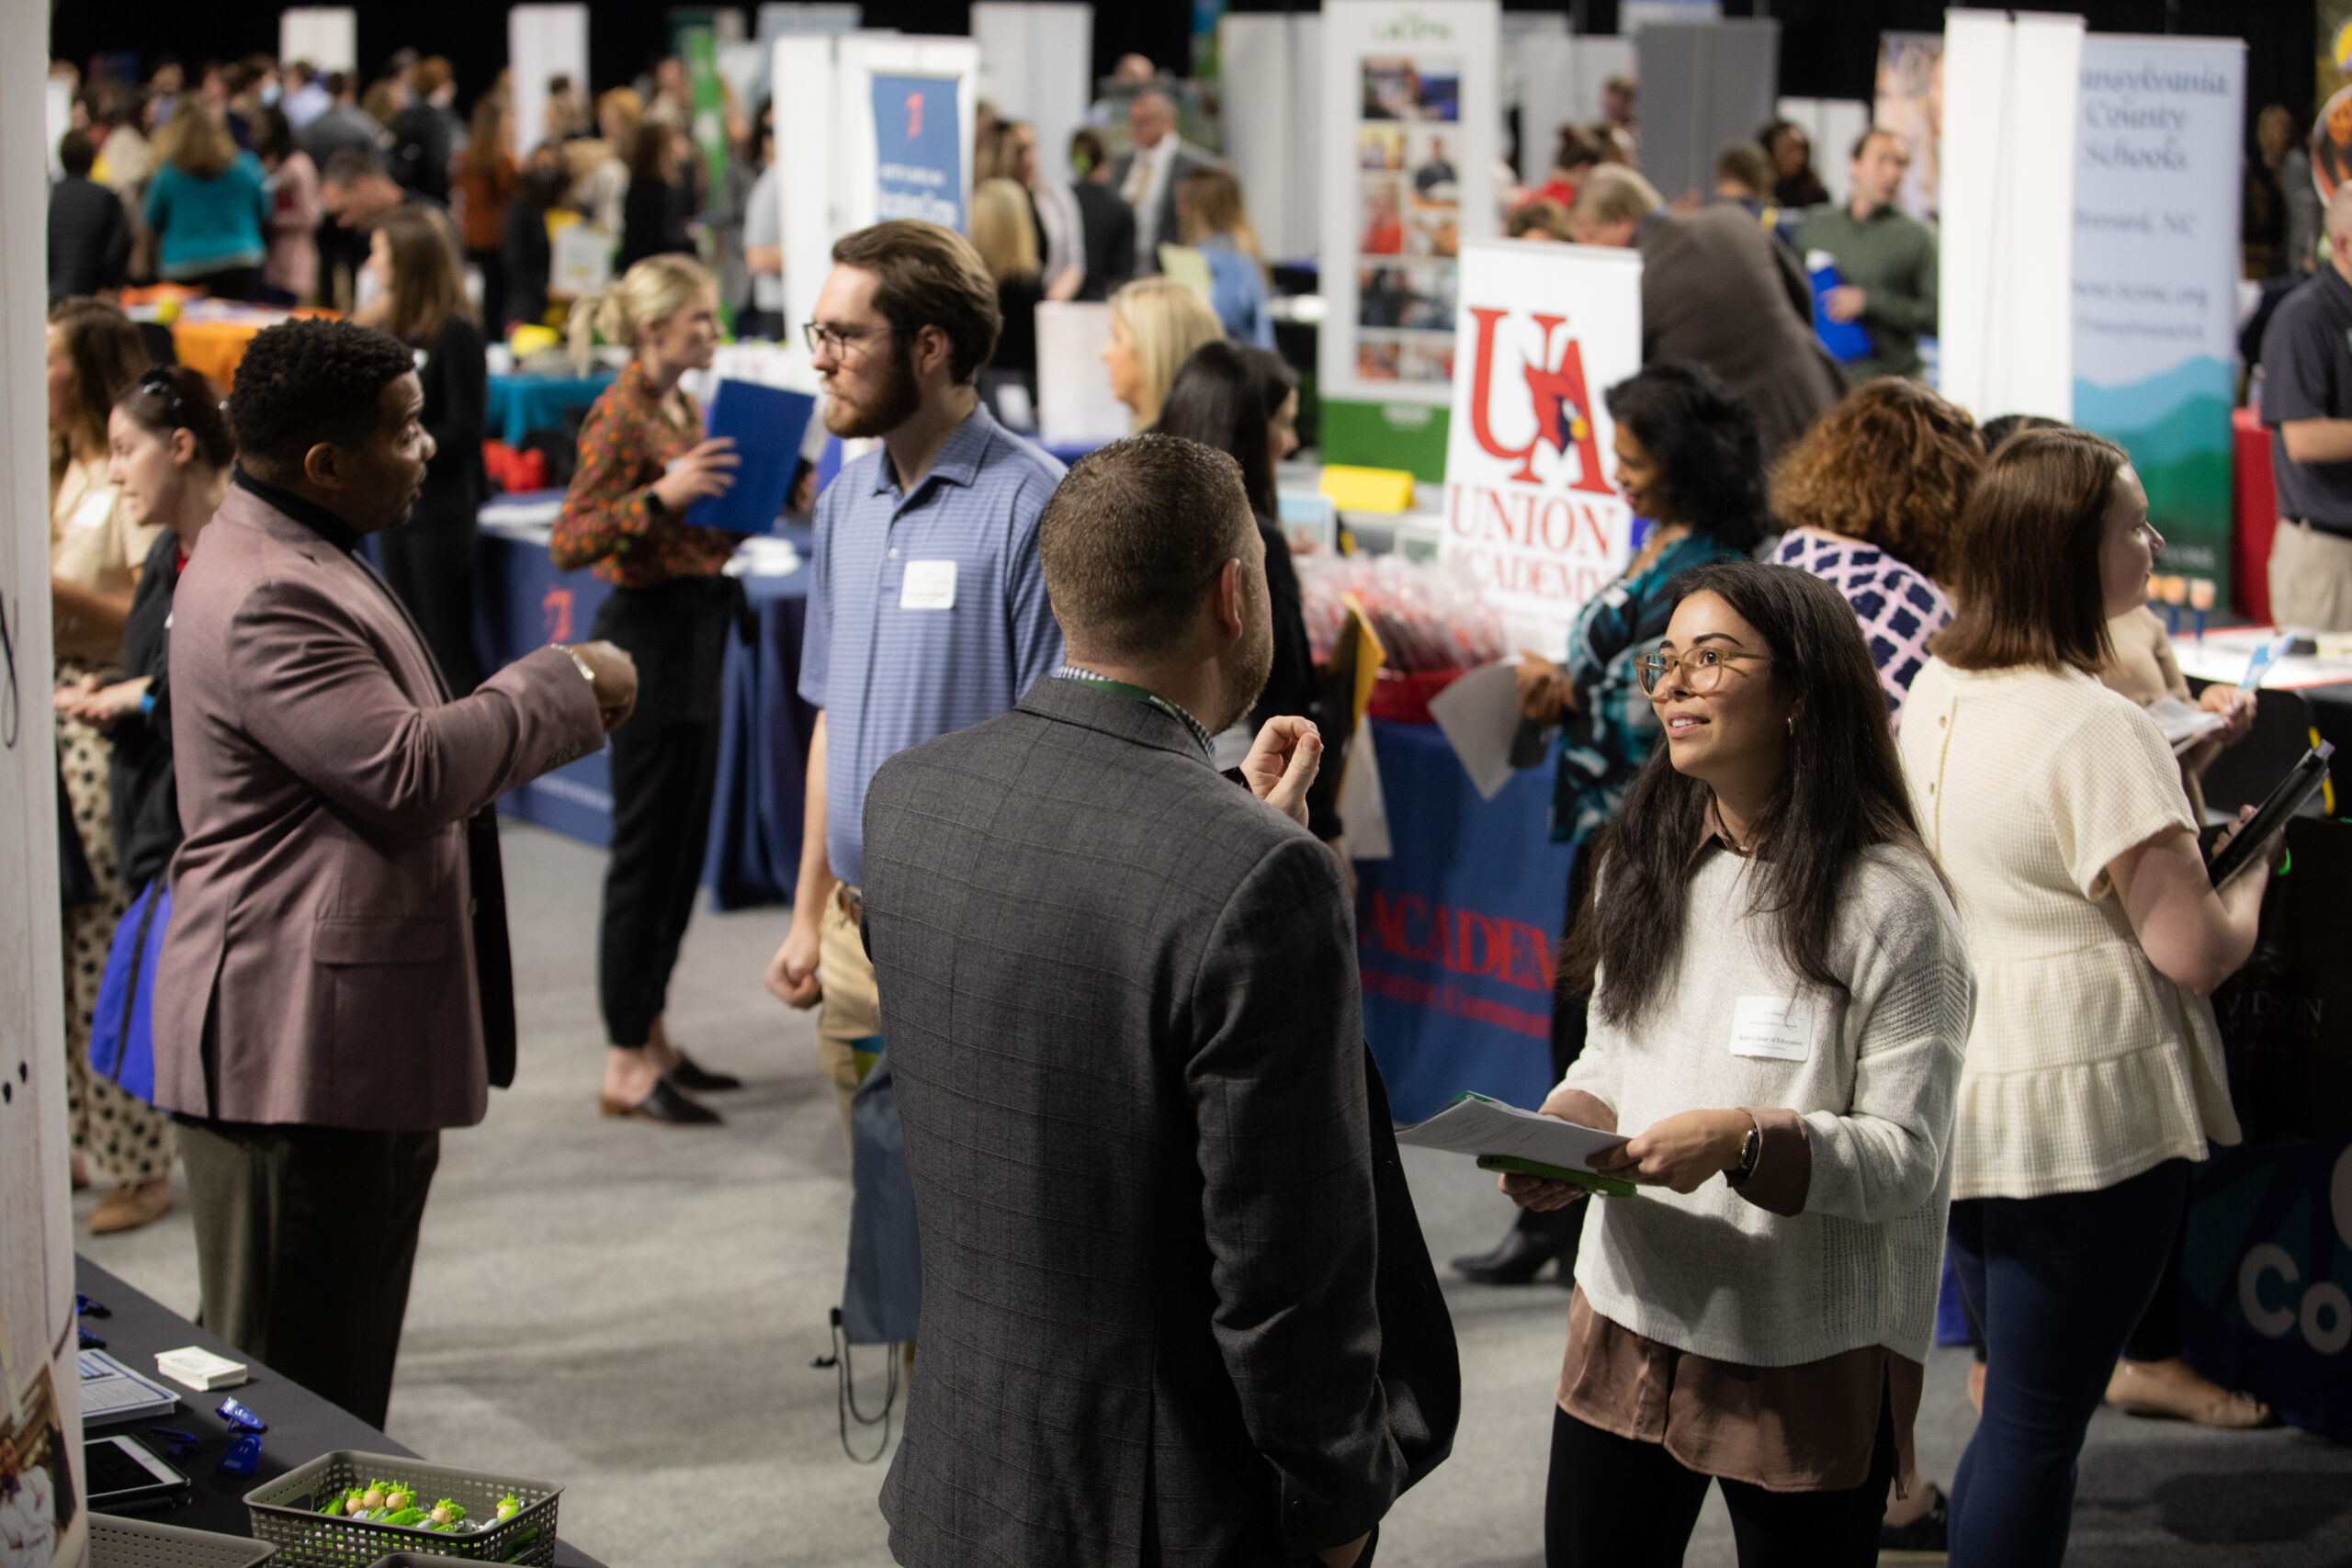 Networking at a career fair